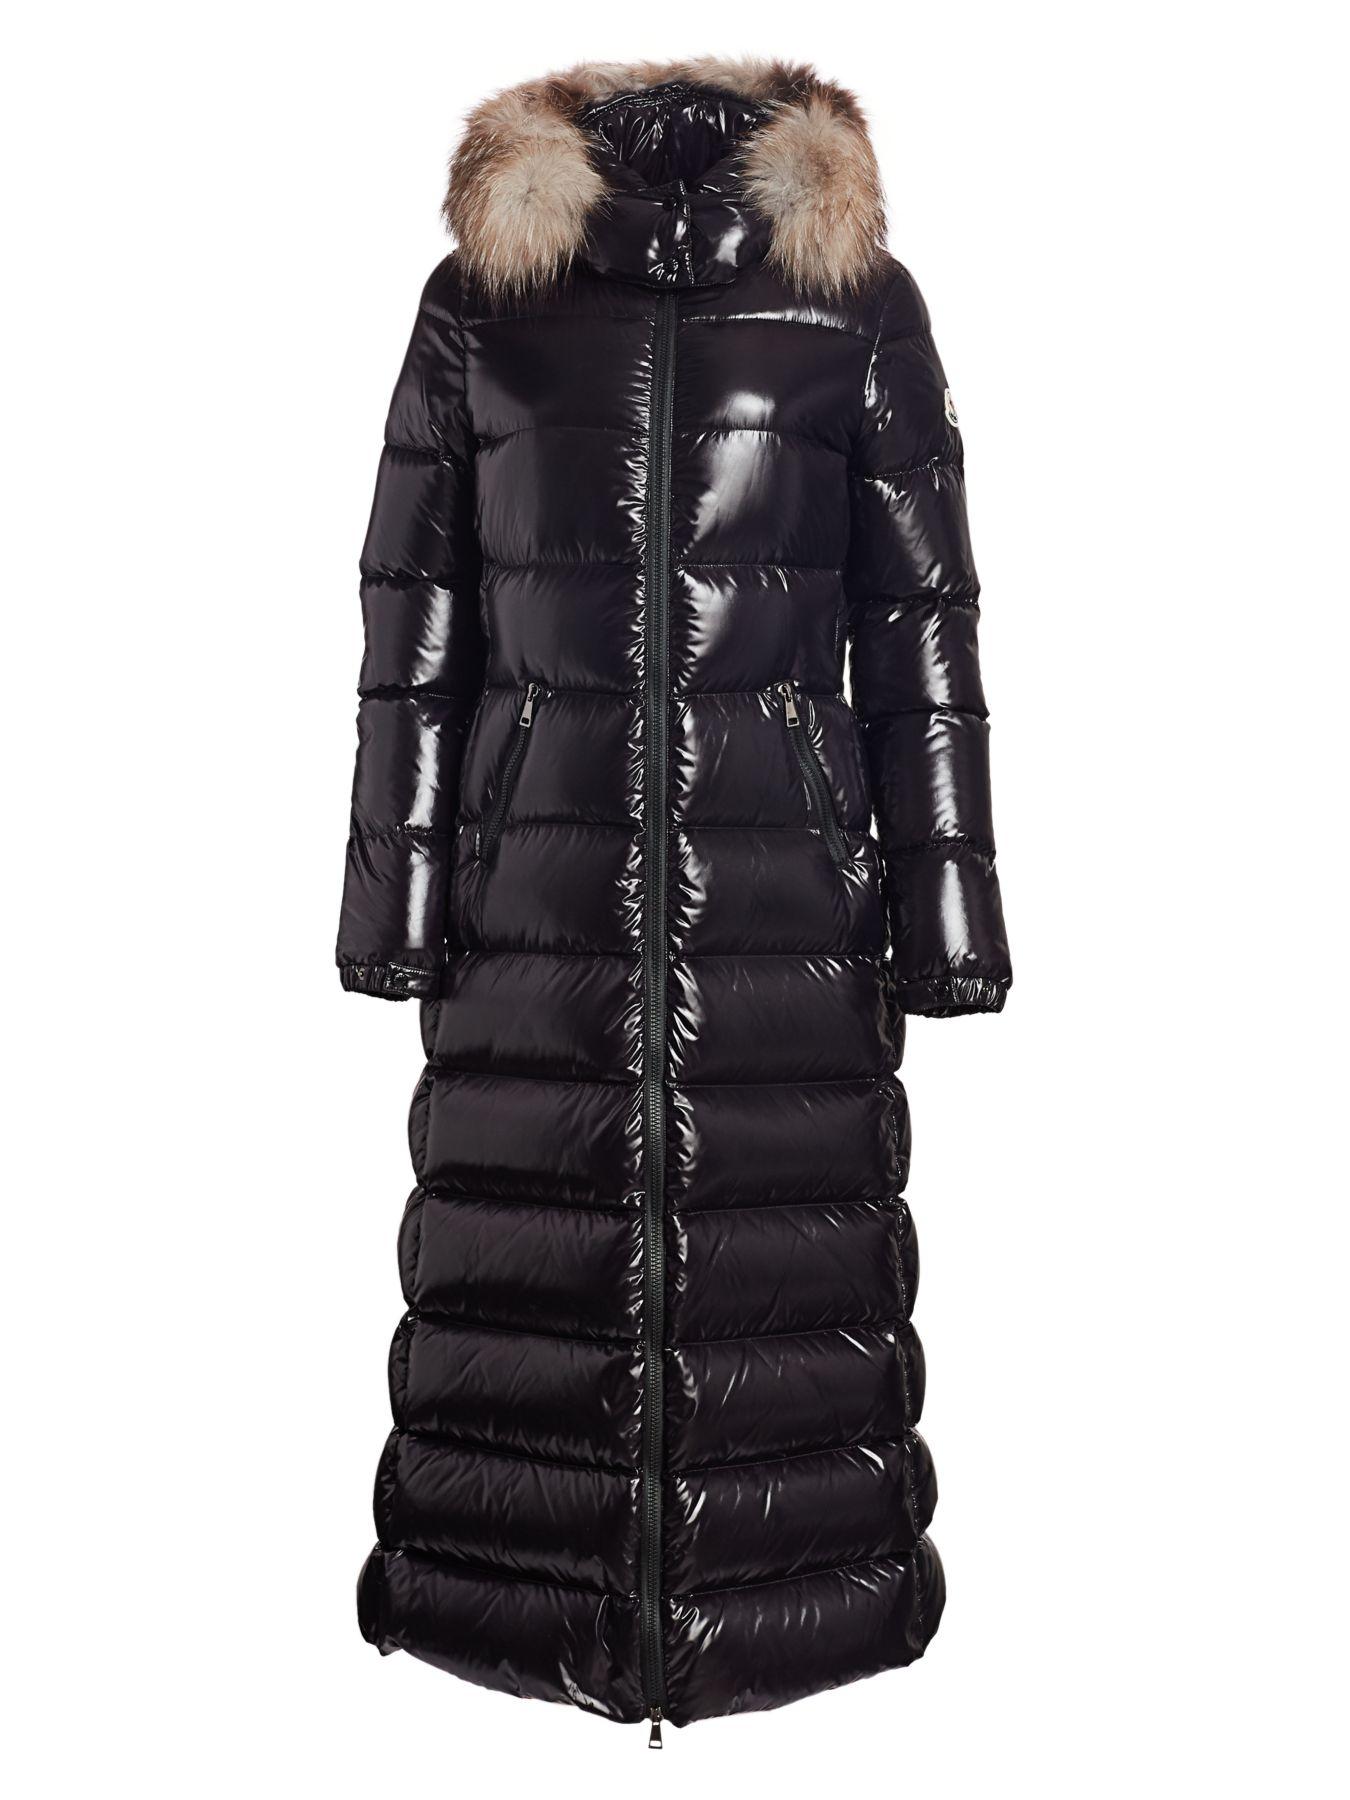 Moncler Synthetic Hudson Lacquer Fox Fur-trim Puffer Coat in Black - Lyst